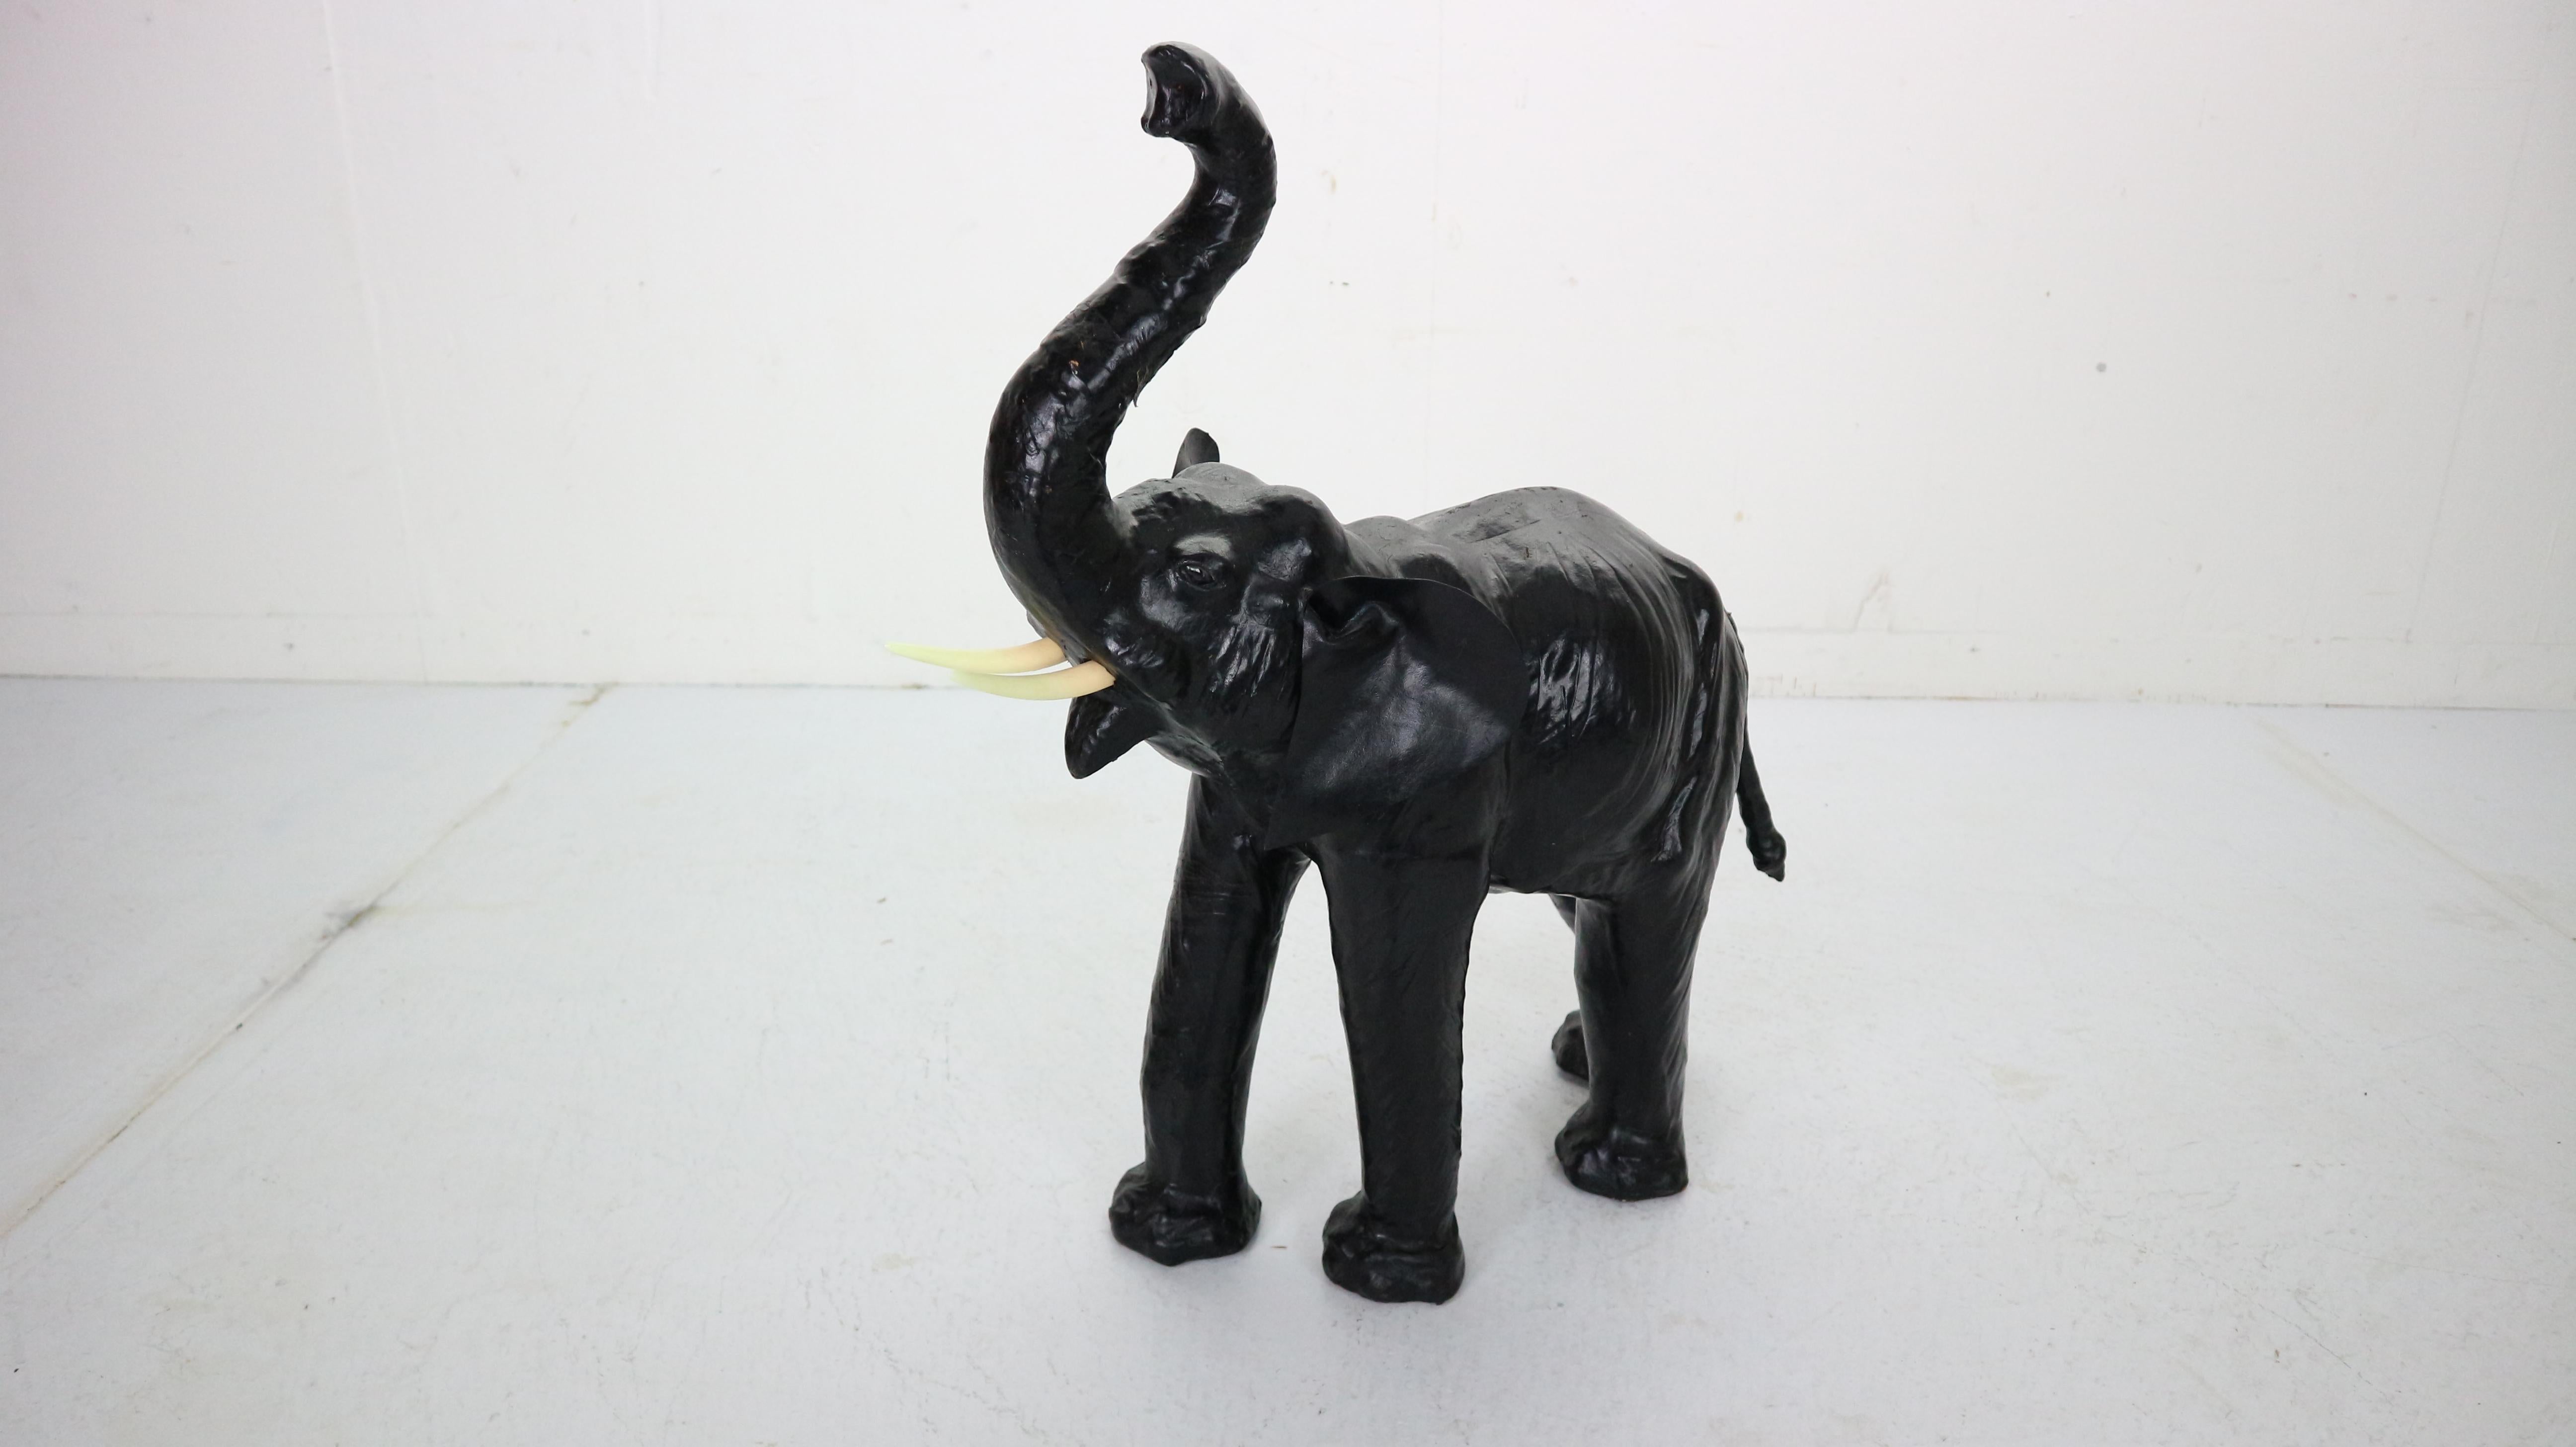 This leather elephant statue adds an eclectic accent to any vignette. A great addition to decor of African or Asian influences, as well as modern, Bohemian, and Industrial spaces. Animal art and decor is timeless, an endlessly relevant style.